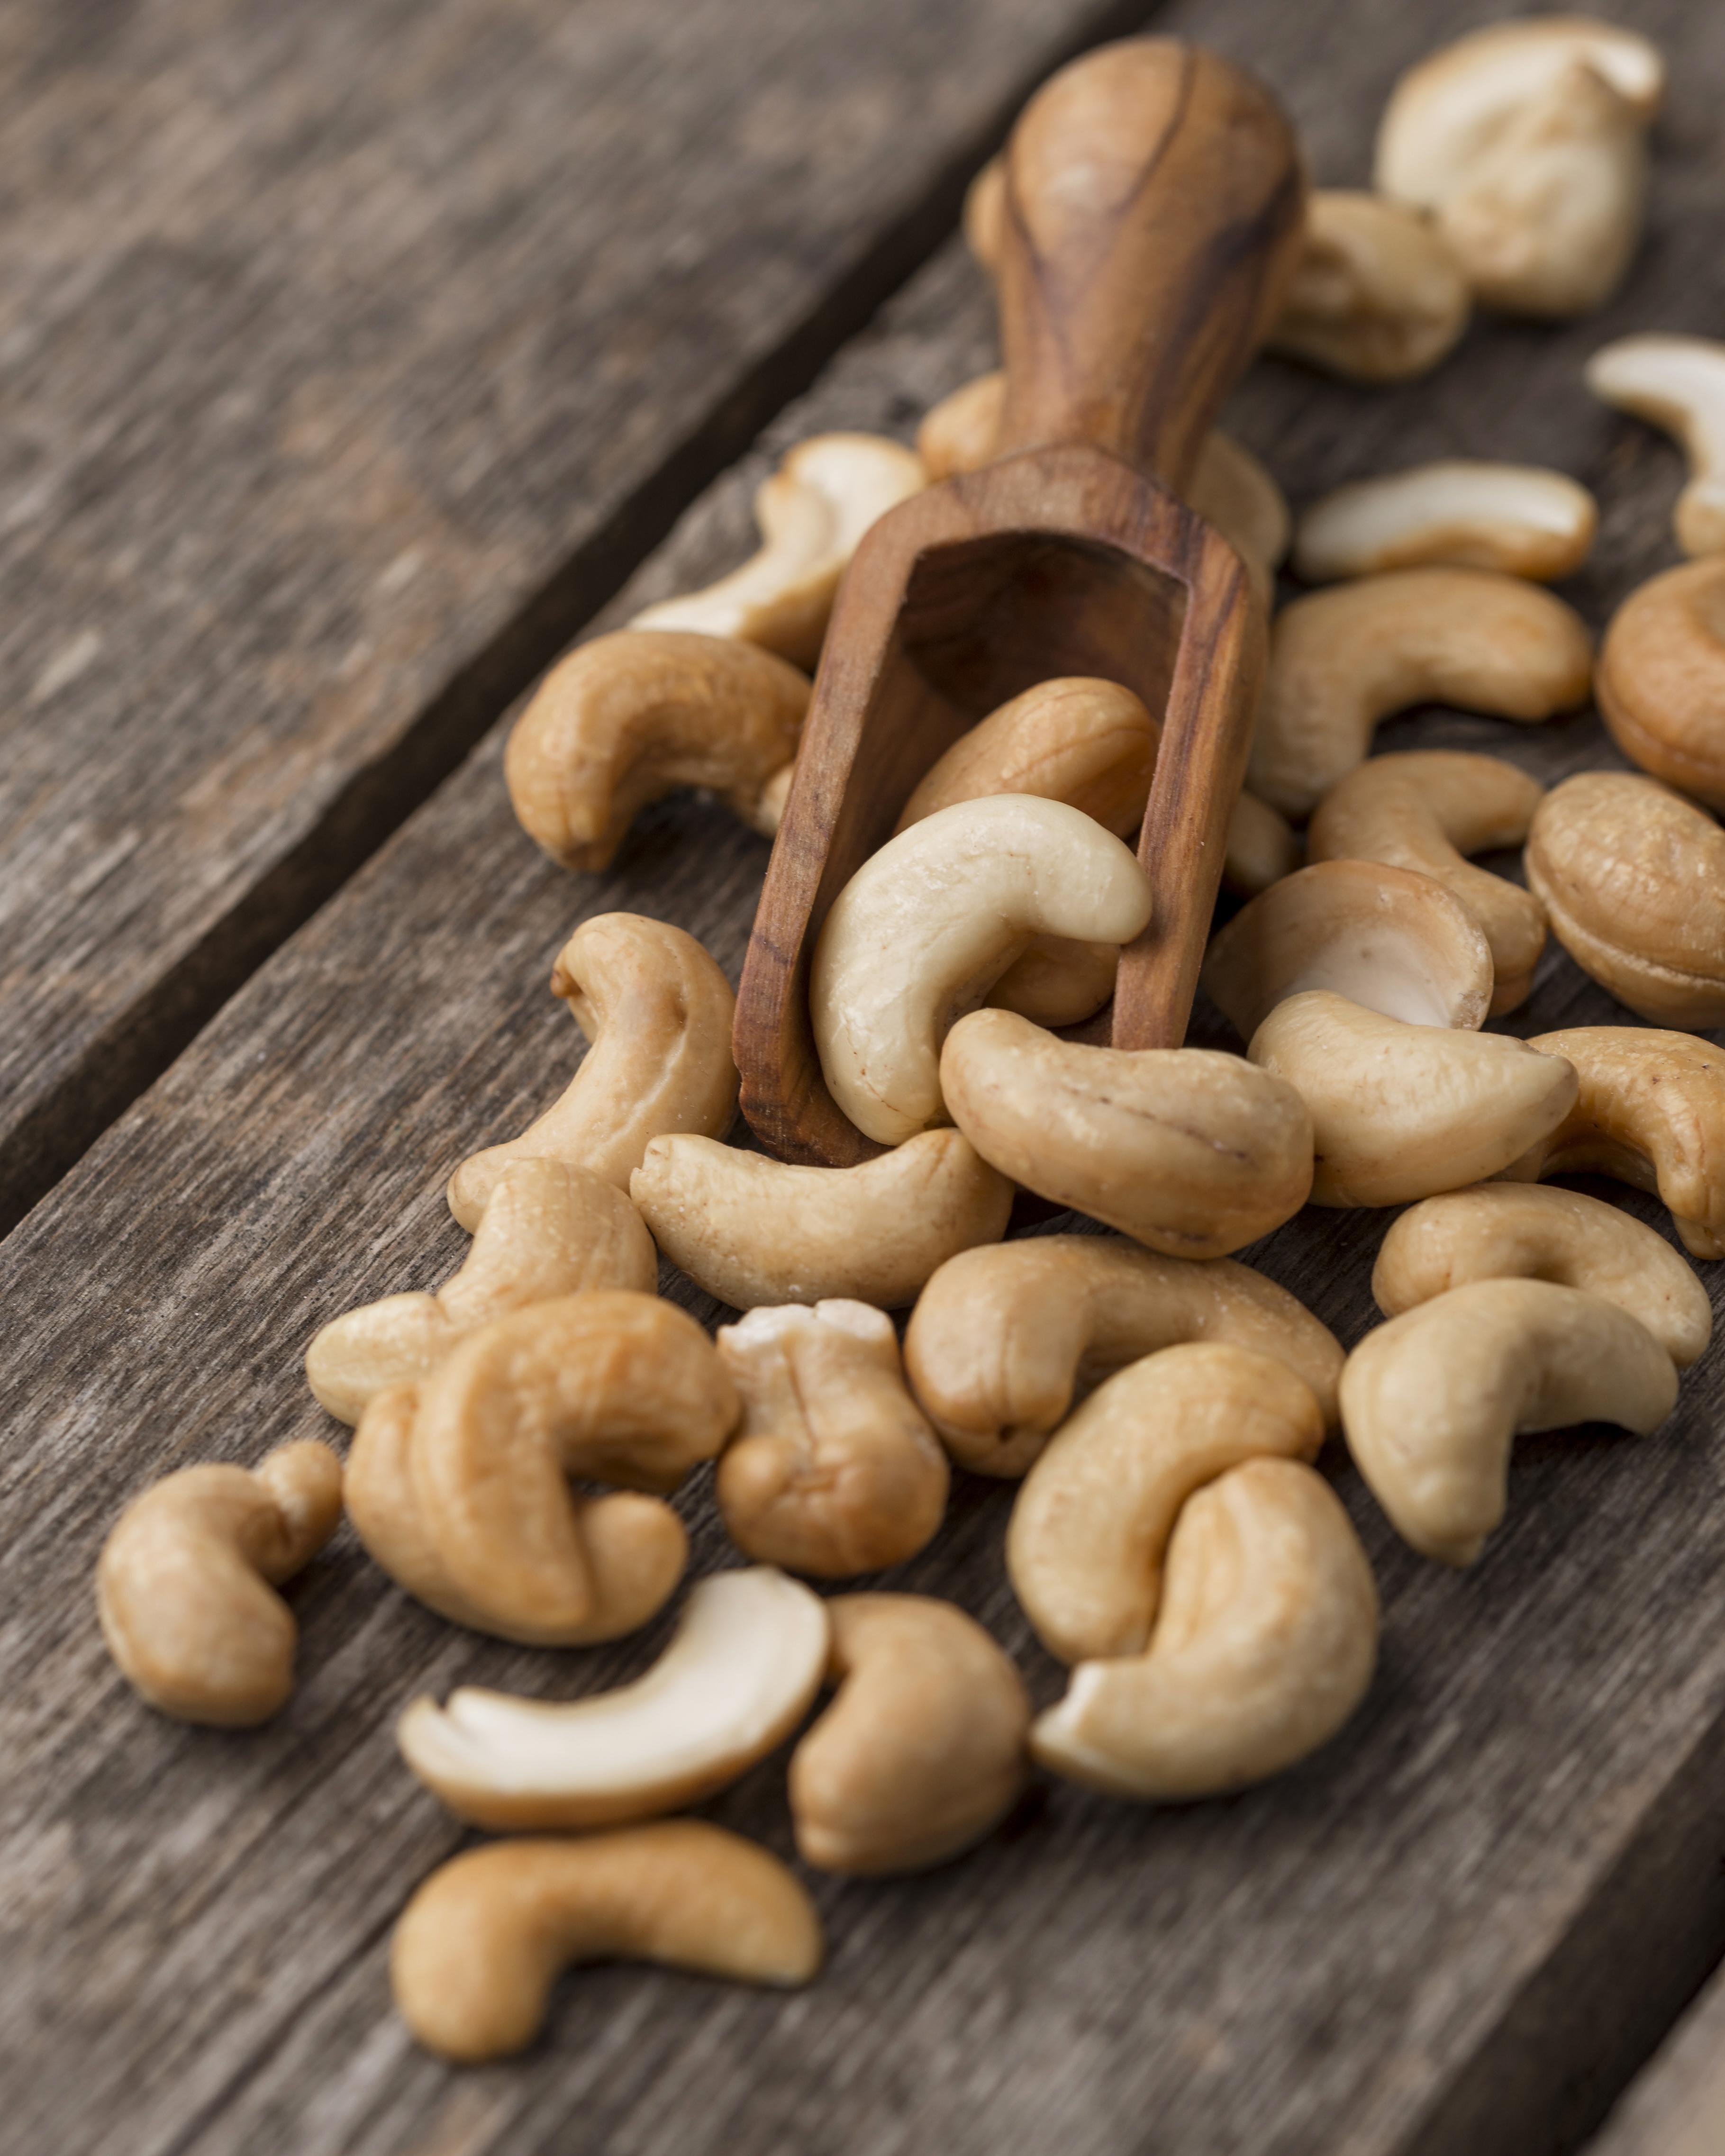 Cashew suppliers In India, Cashew Suppliers In India, Aaditya Traders Suppliers In India, Best Cashew Suppliers In India, Best Suppliers In India, Premium Suppliers In India, Cashew Supplier In India